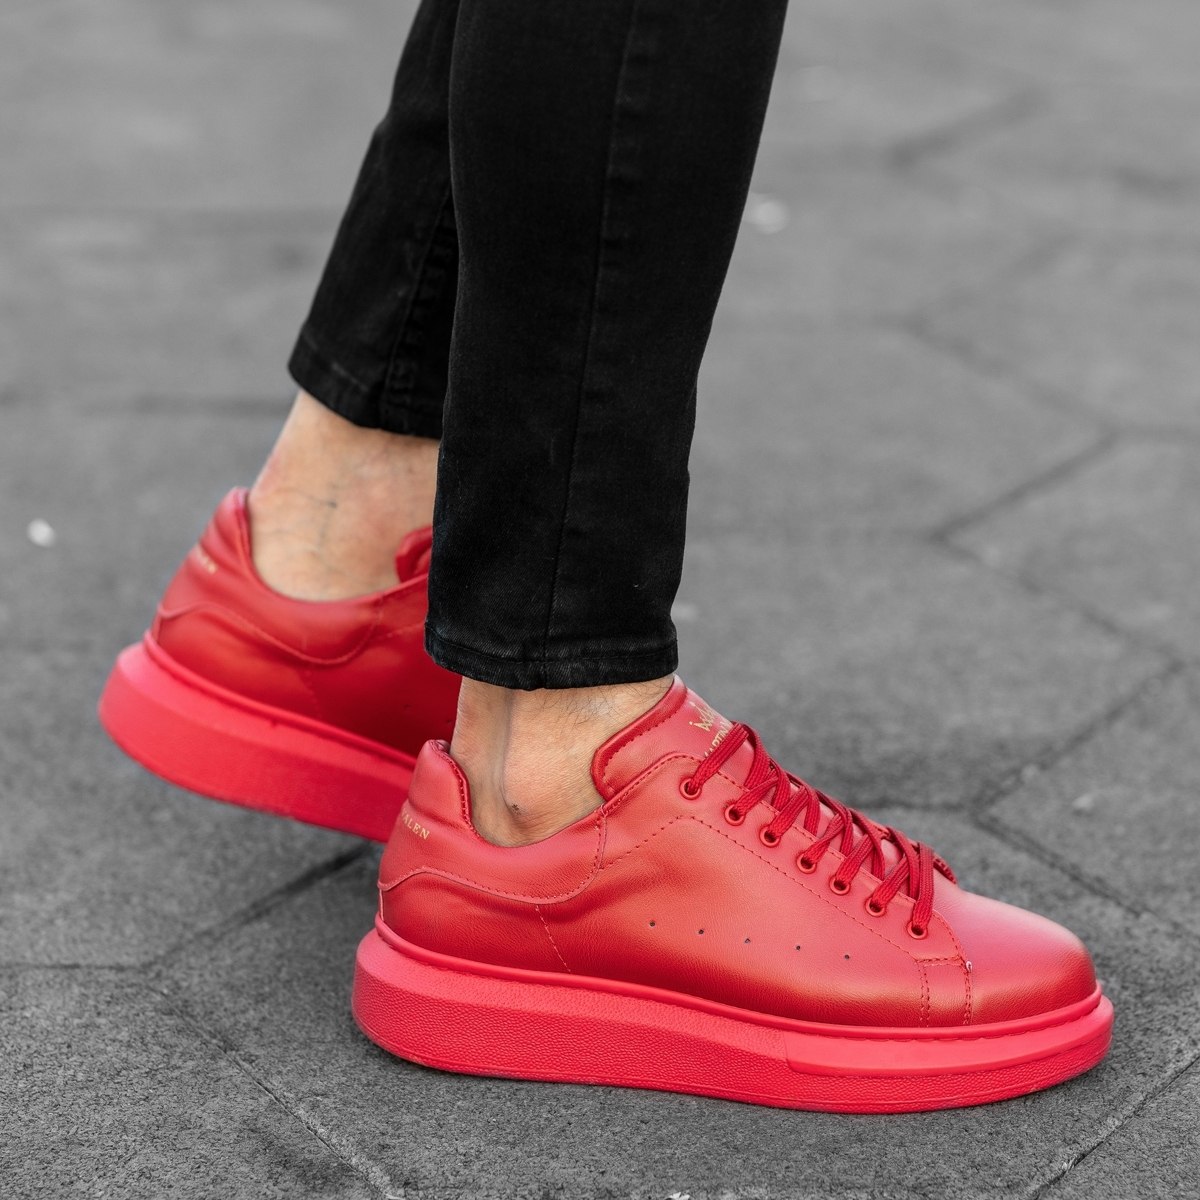 Chunky Sneakers Shoes Red | Martin Valen